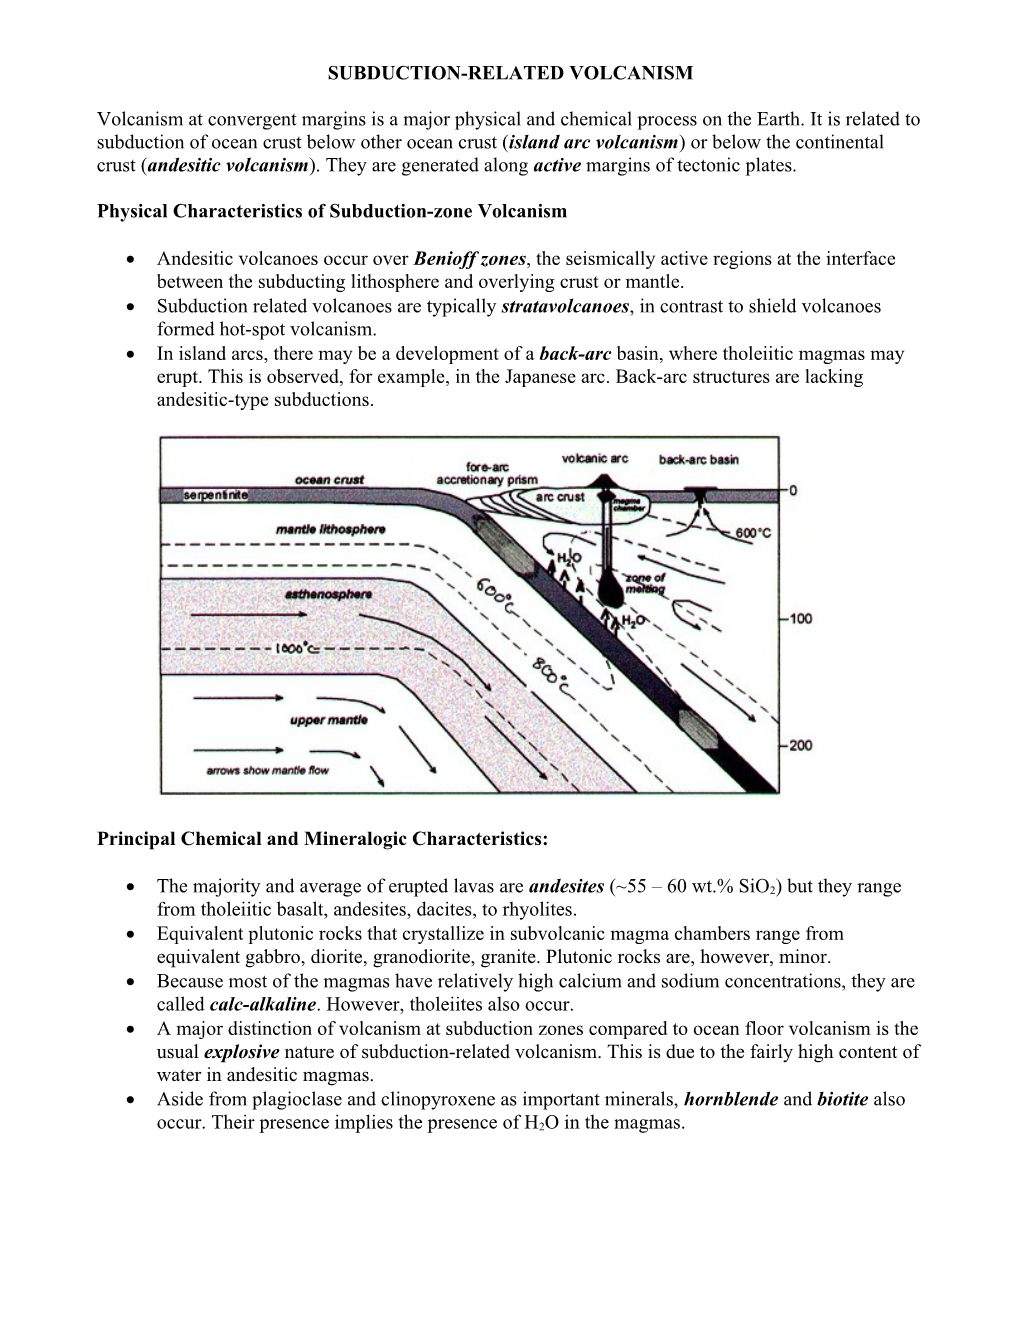 Subduction-Related Volcanism